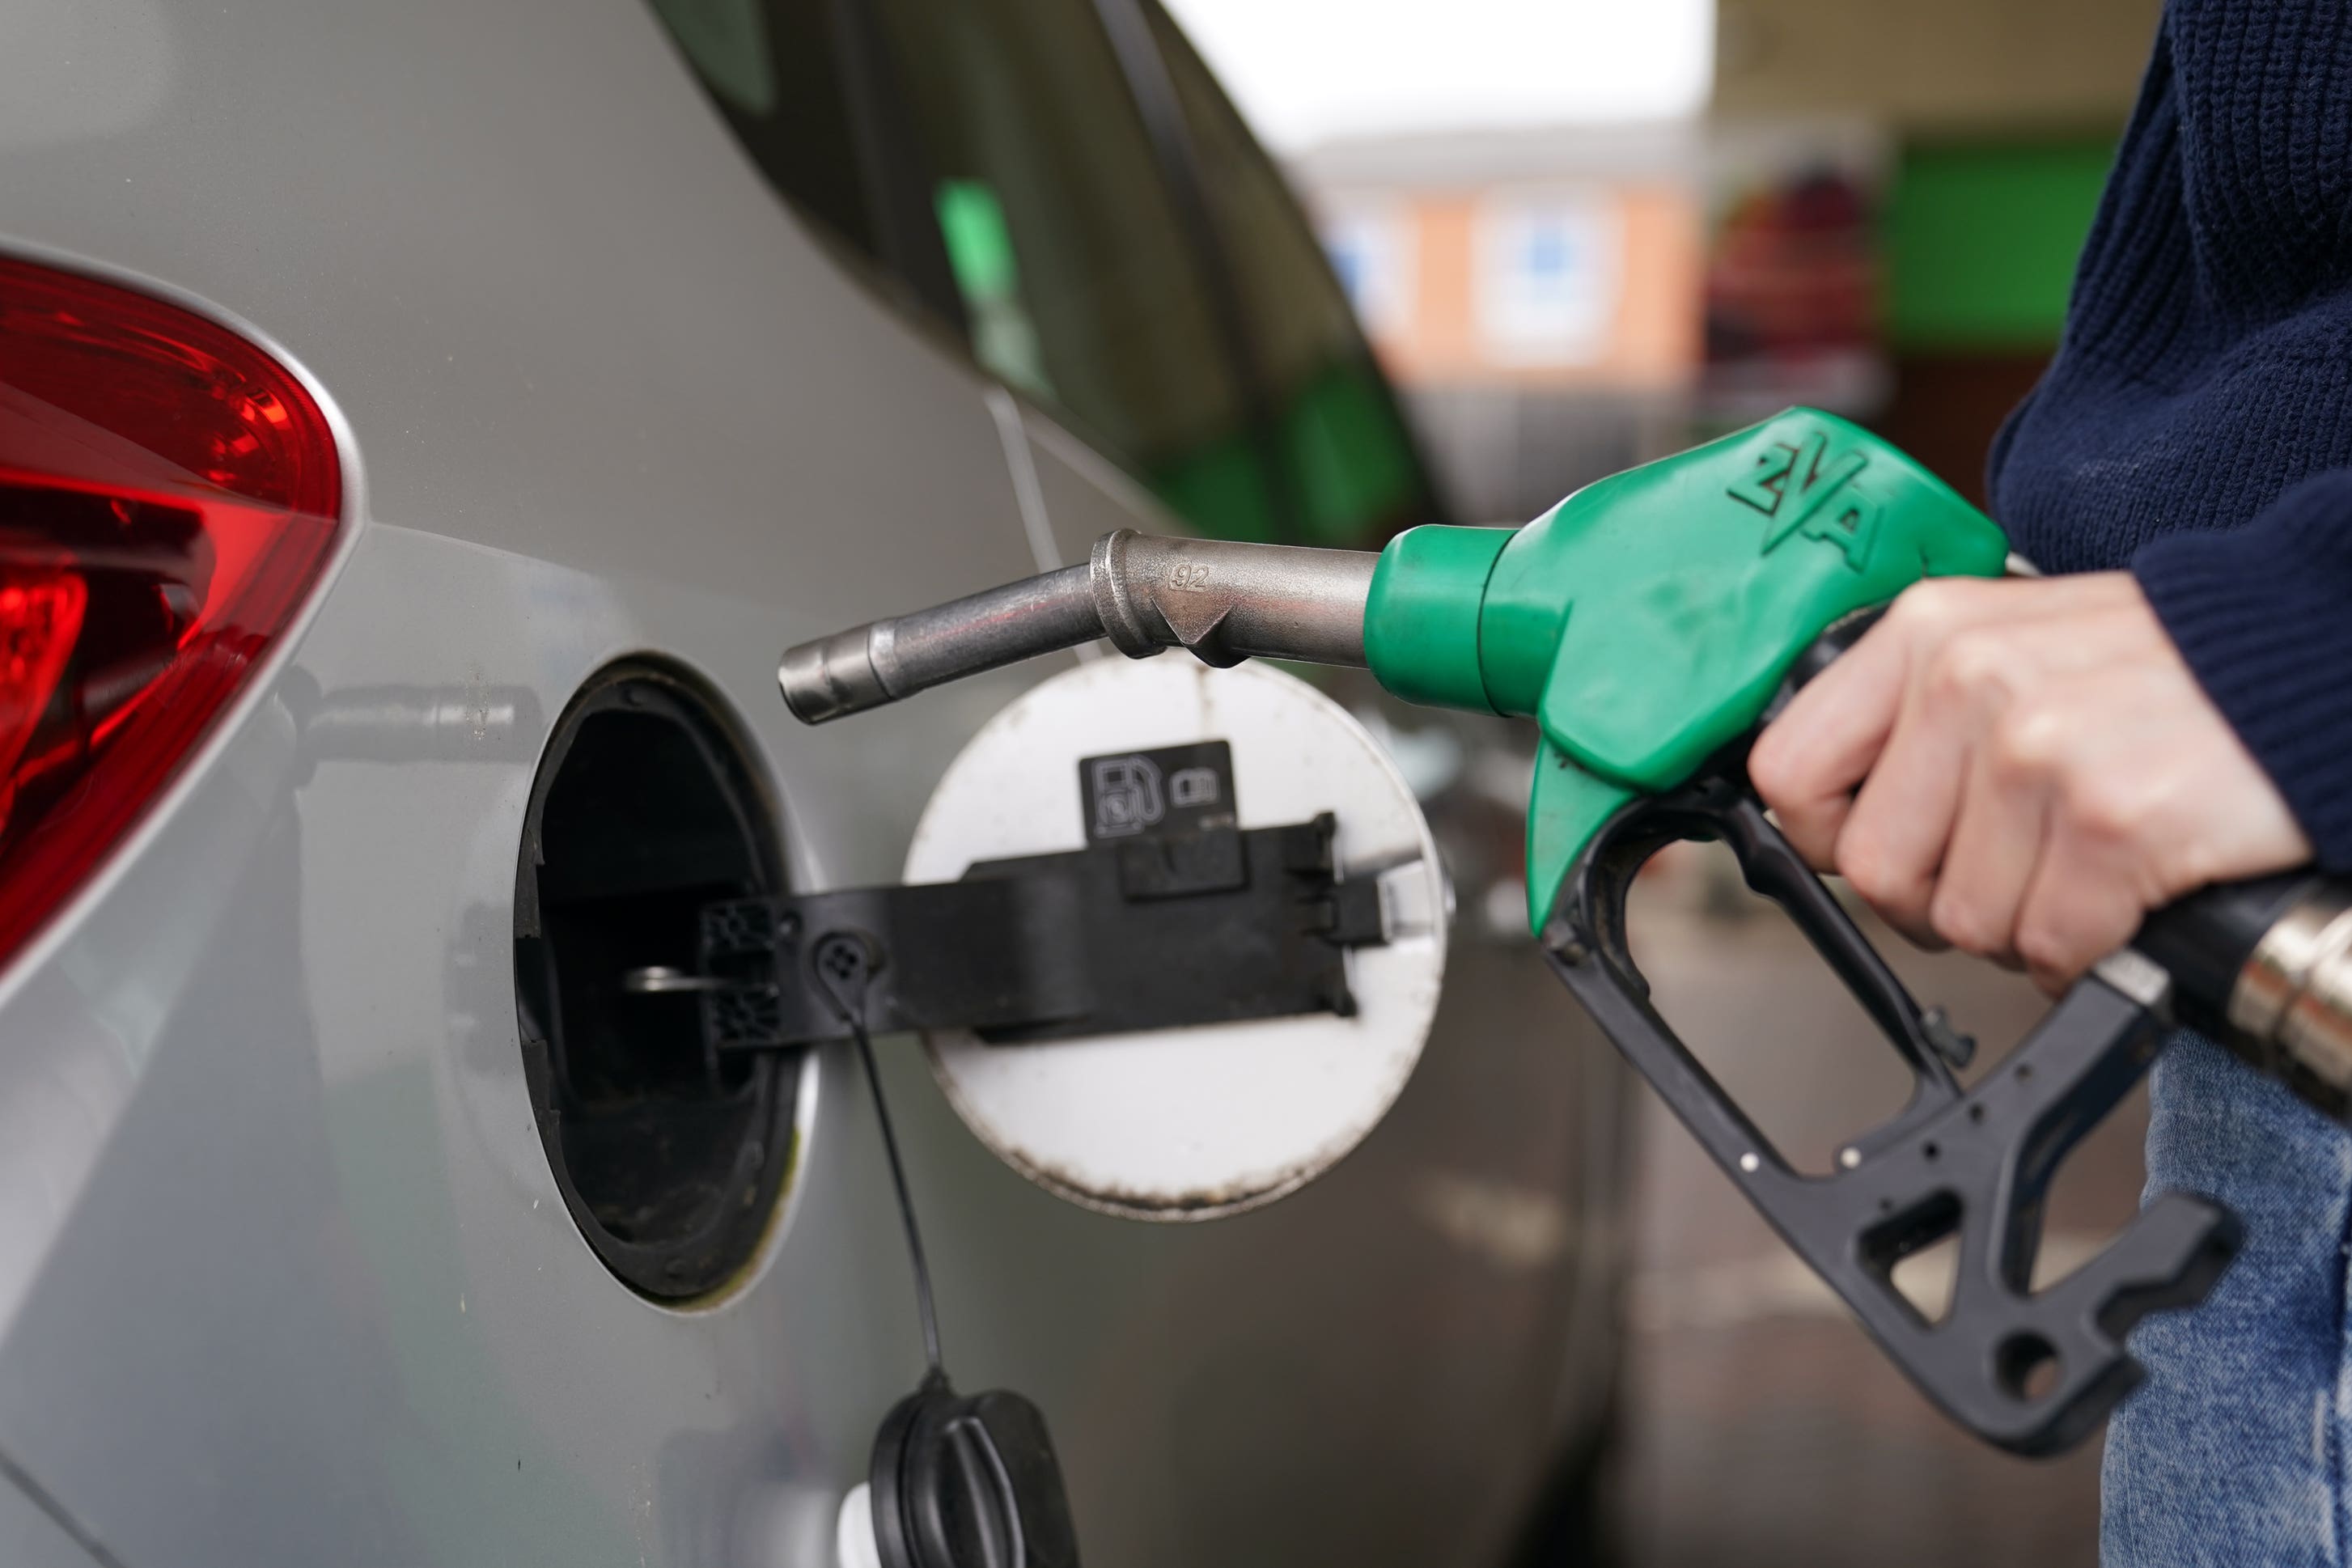 The Office for Budget Responsibility said the move would add around 12p per litre to pump prices (PA)